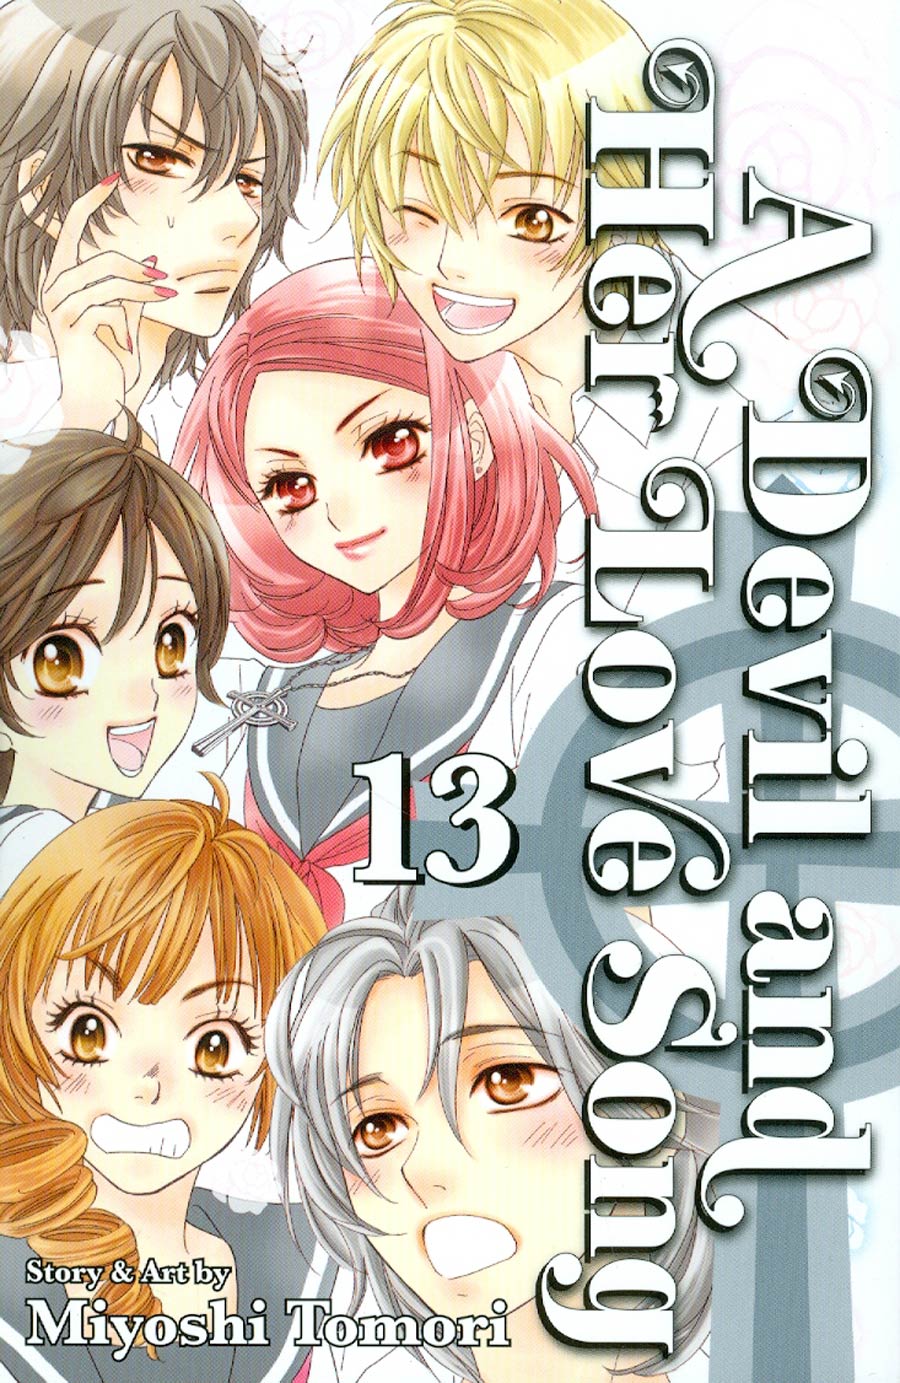 Devil And Her Love Song Vol 13 TP